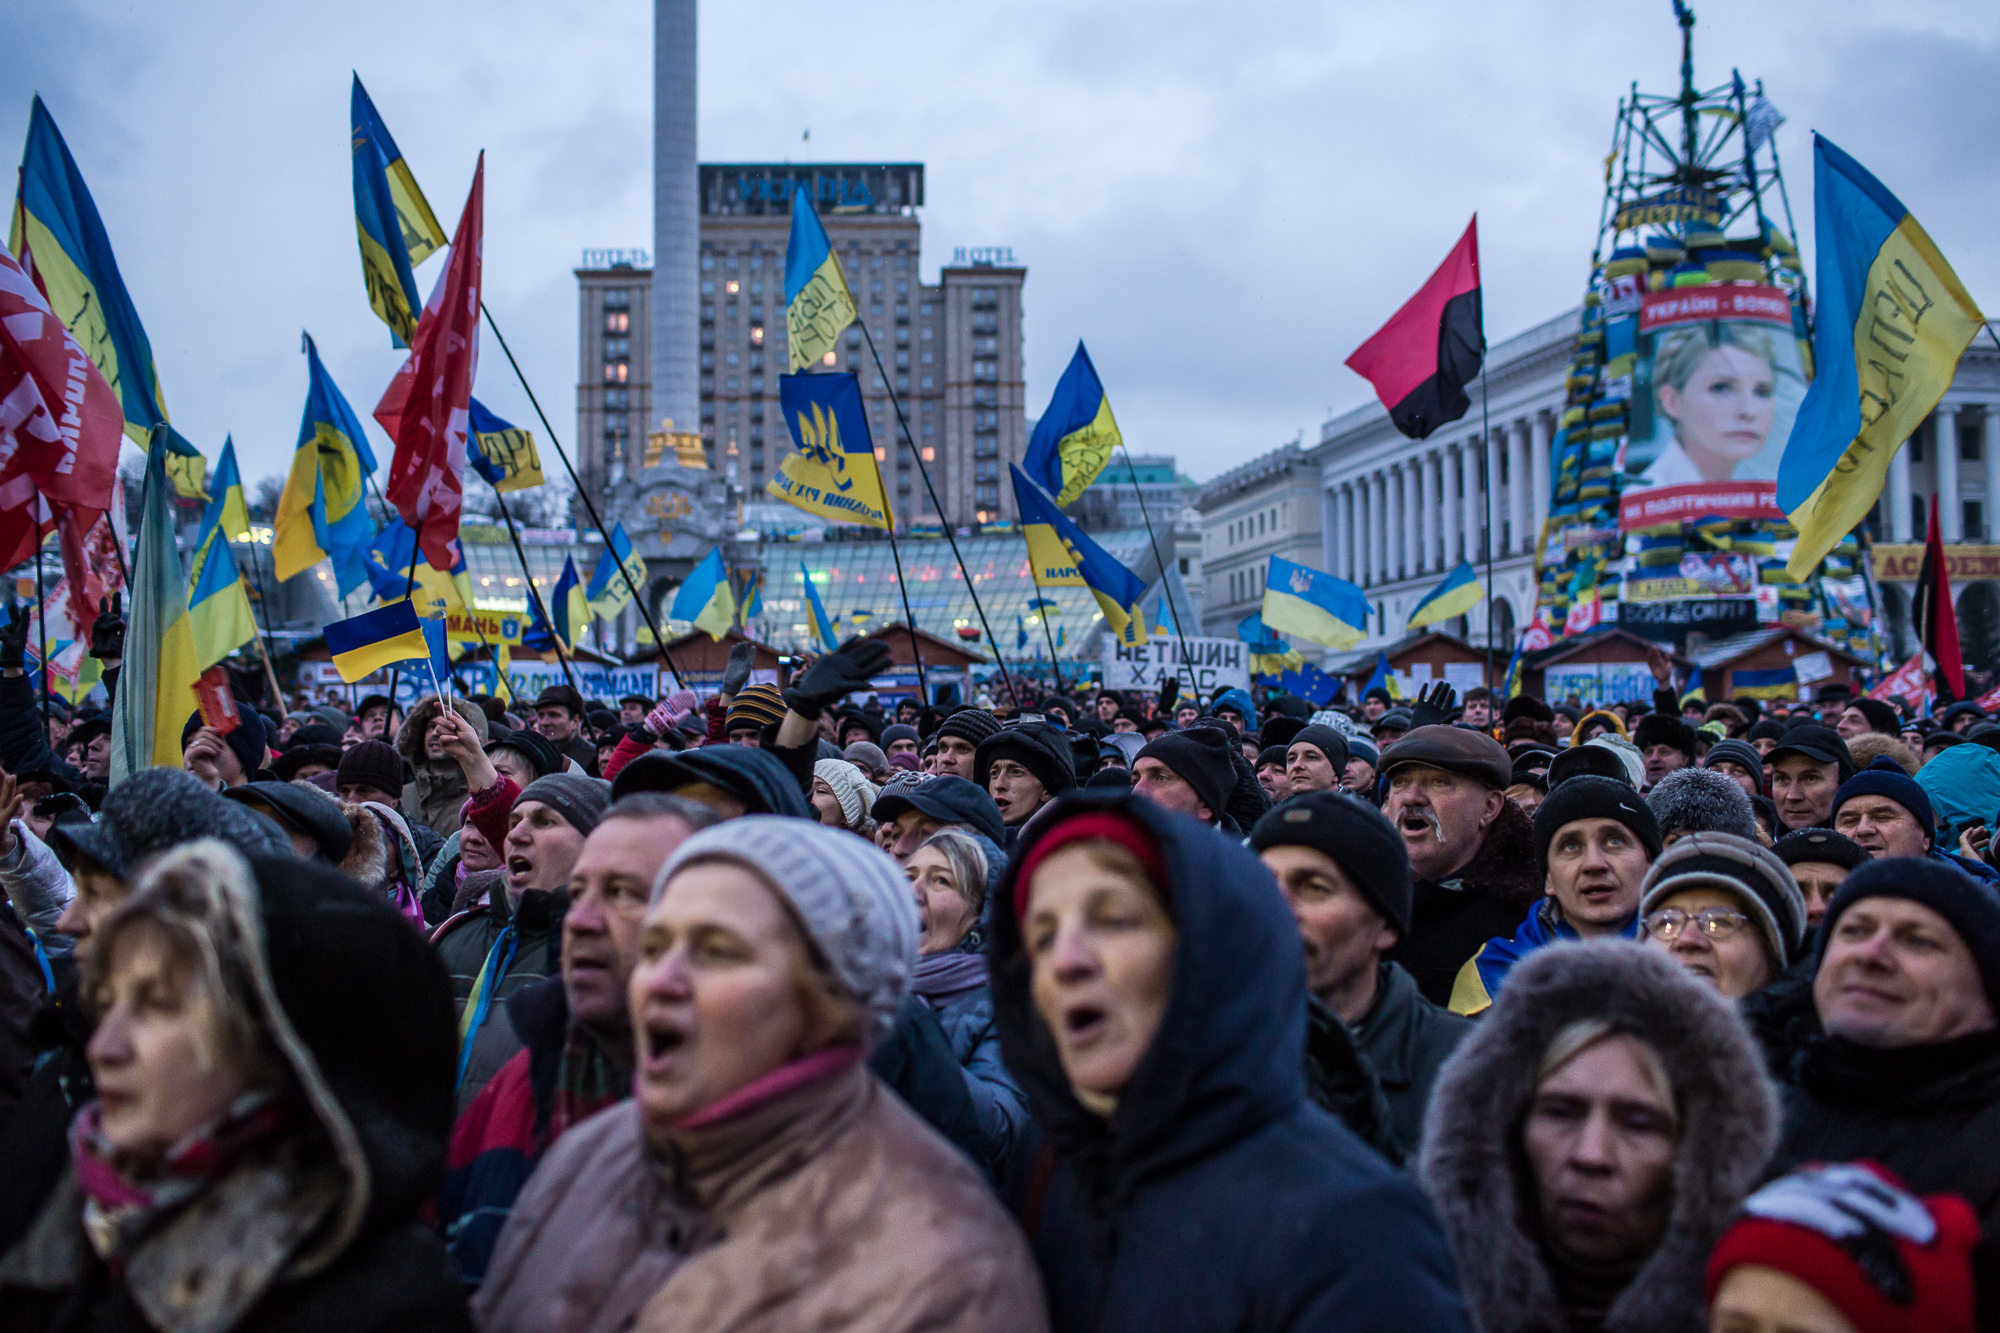  Anti-government protesters rally on Independence Square on December 7, 2013 in Kiev, Ukraine. Thousands of people have been protesting against the government since a decision by Ukrainian president Viktor Yanukovych to suspend a trade and partnershi